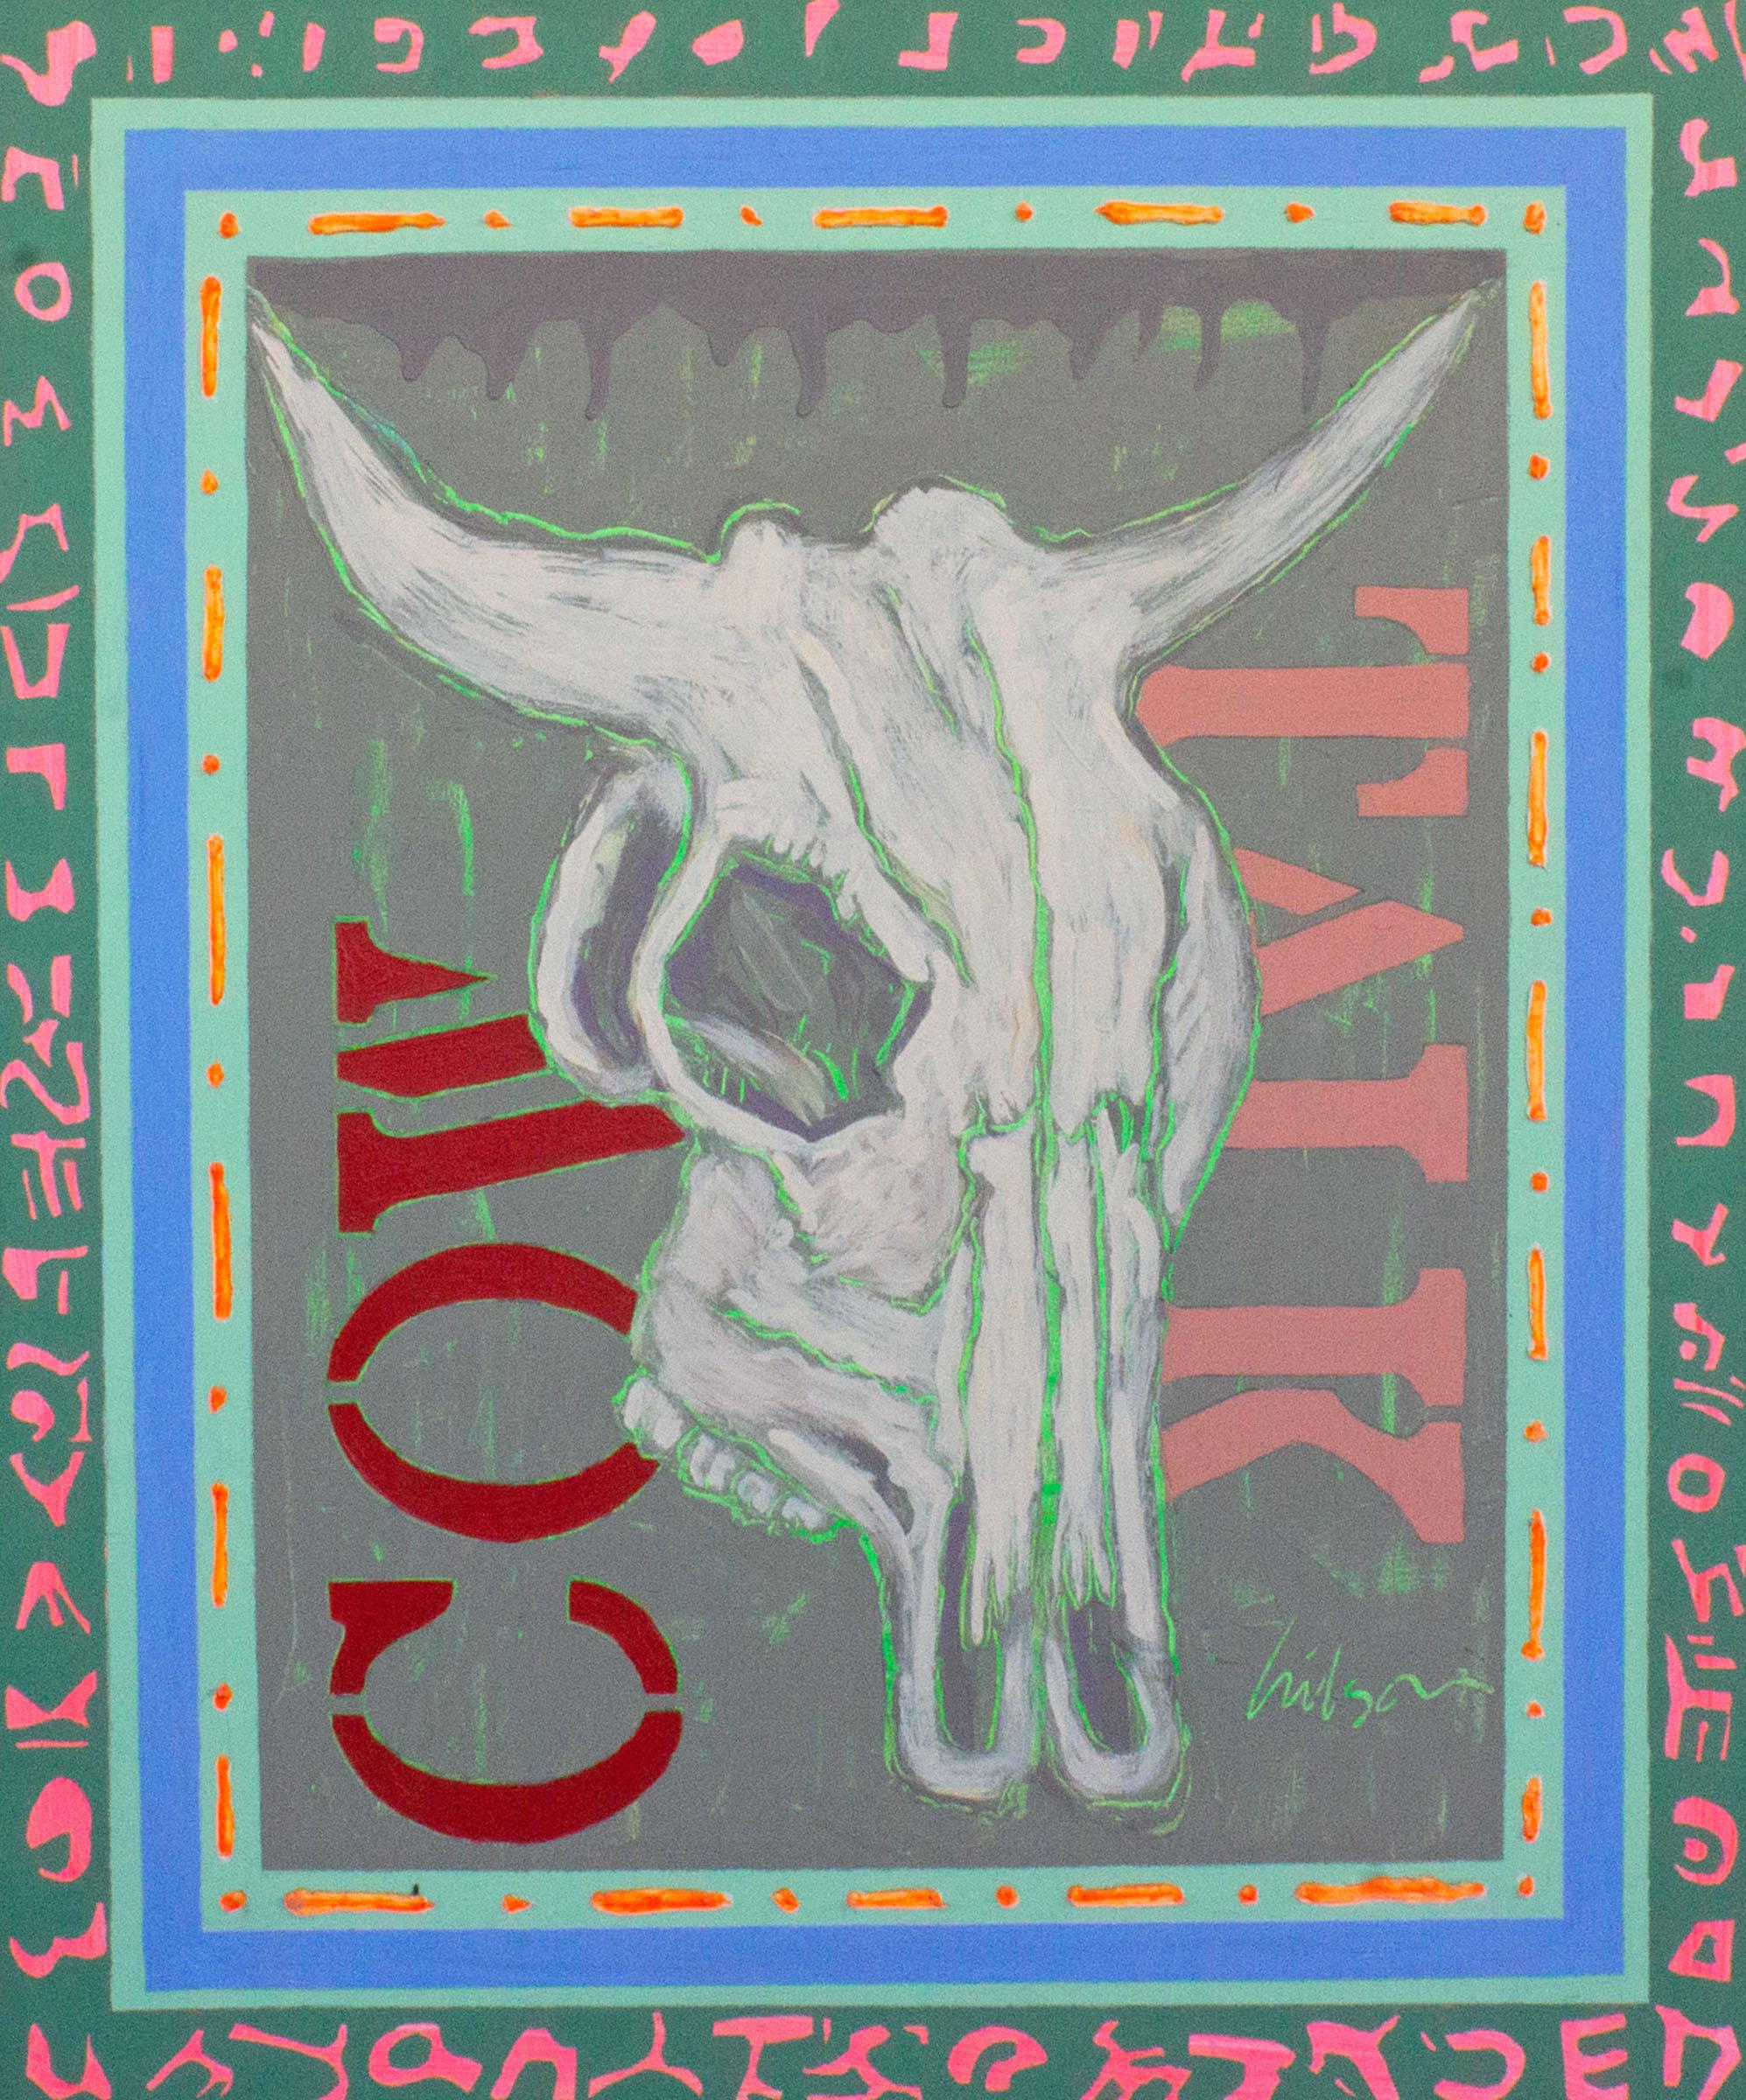 A 1990s signed abstract acrylic painting by American artist Harry Hilson (1935-2004). Titled Cow Talk, this piece explores Hilson's continuously developing style. A realistic looking cow skull is central to this scene with a gray background and red